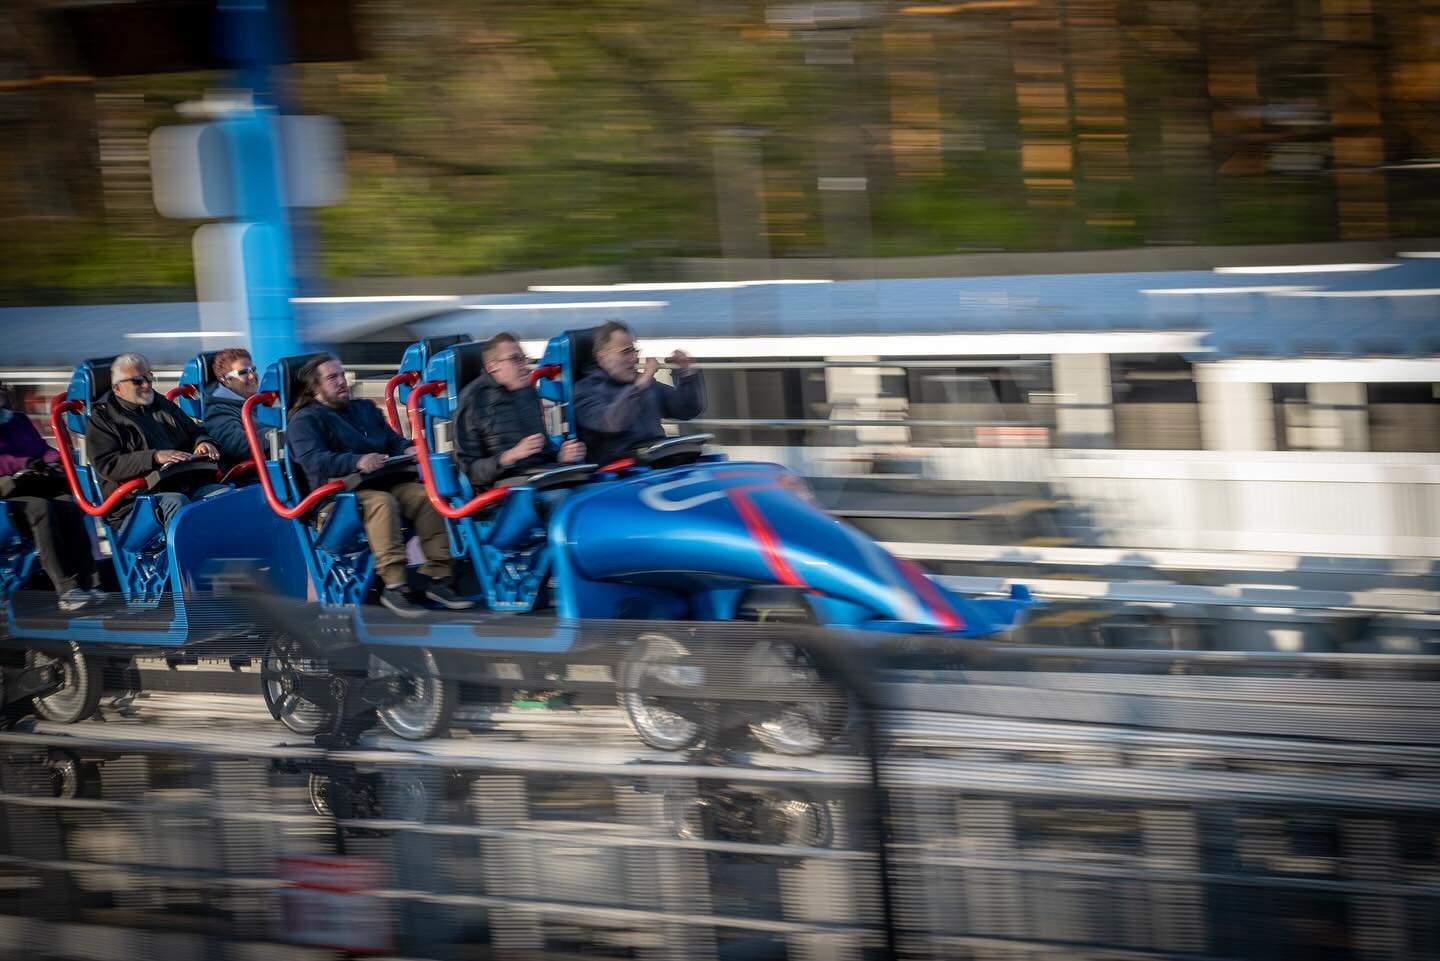 These trains ride as good as they look!! Loving the modern racing aesthetic!! Do these look better than the original Dragster trains?
.
🎢 Top Thrill 2 - Cedar Point (@cedarpoint)
.
.
⚙️ Antonio Zamperla spA (@zamperlacoasters) 
.
.
📸: @cedarpoint 
